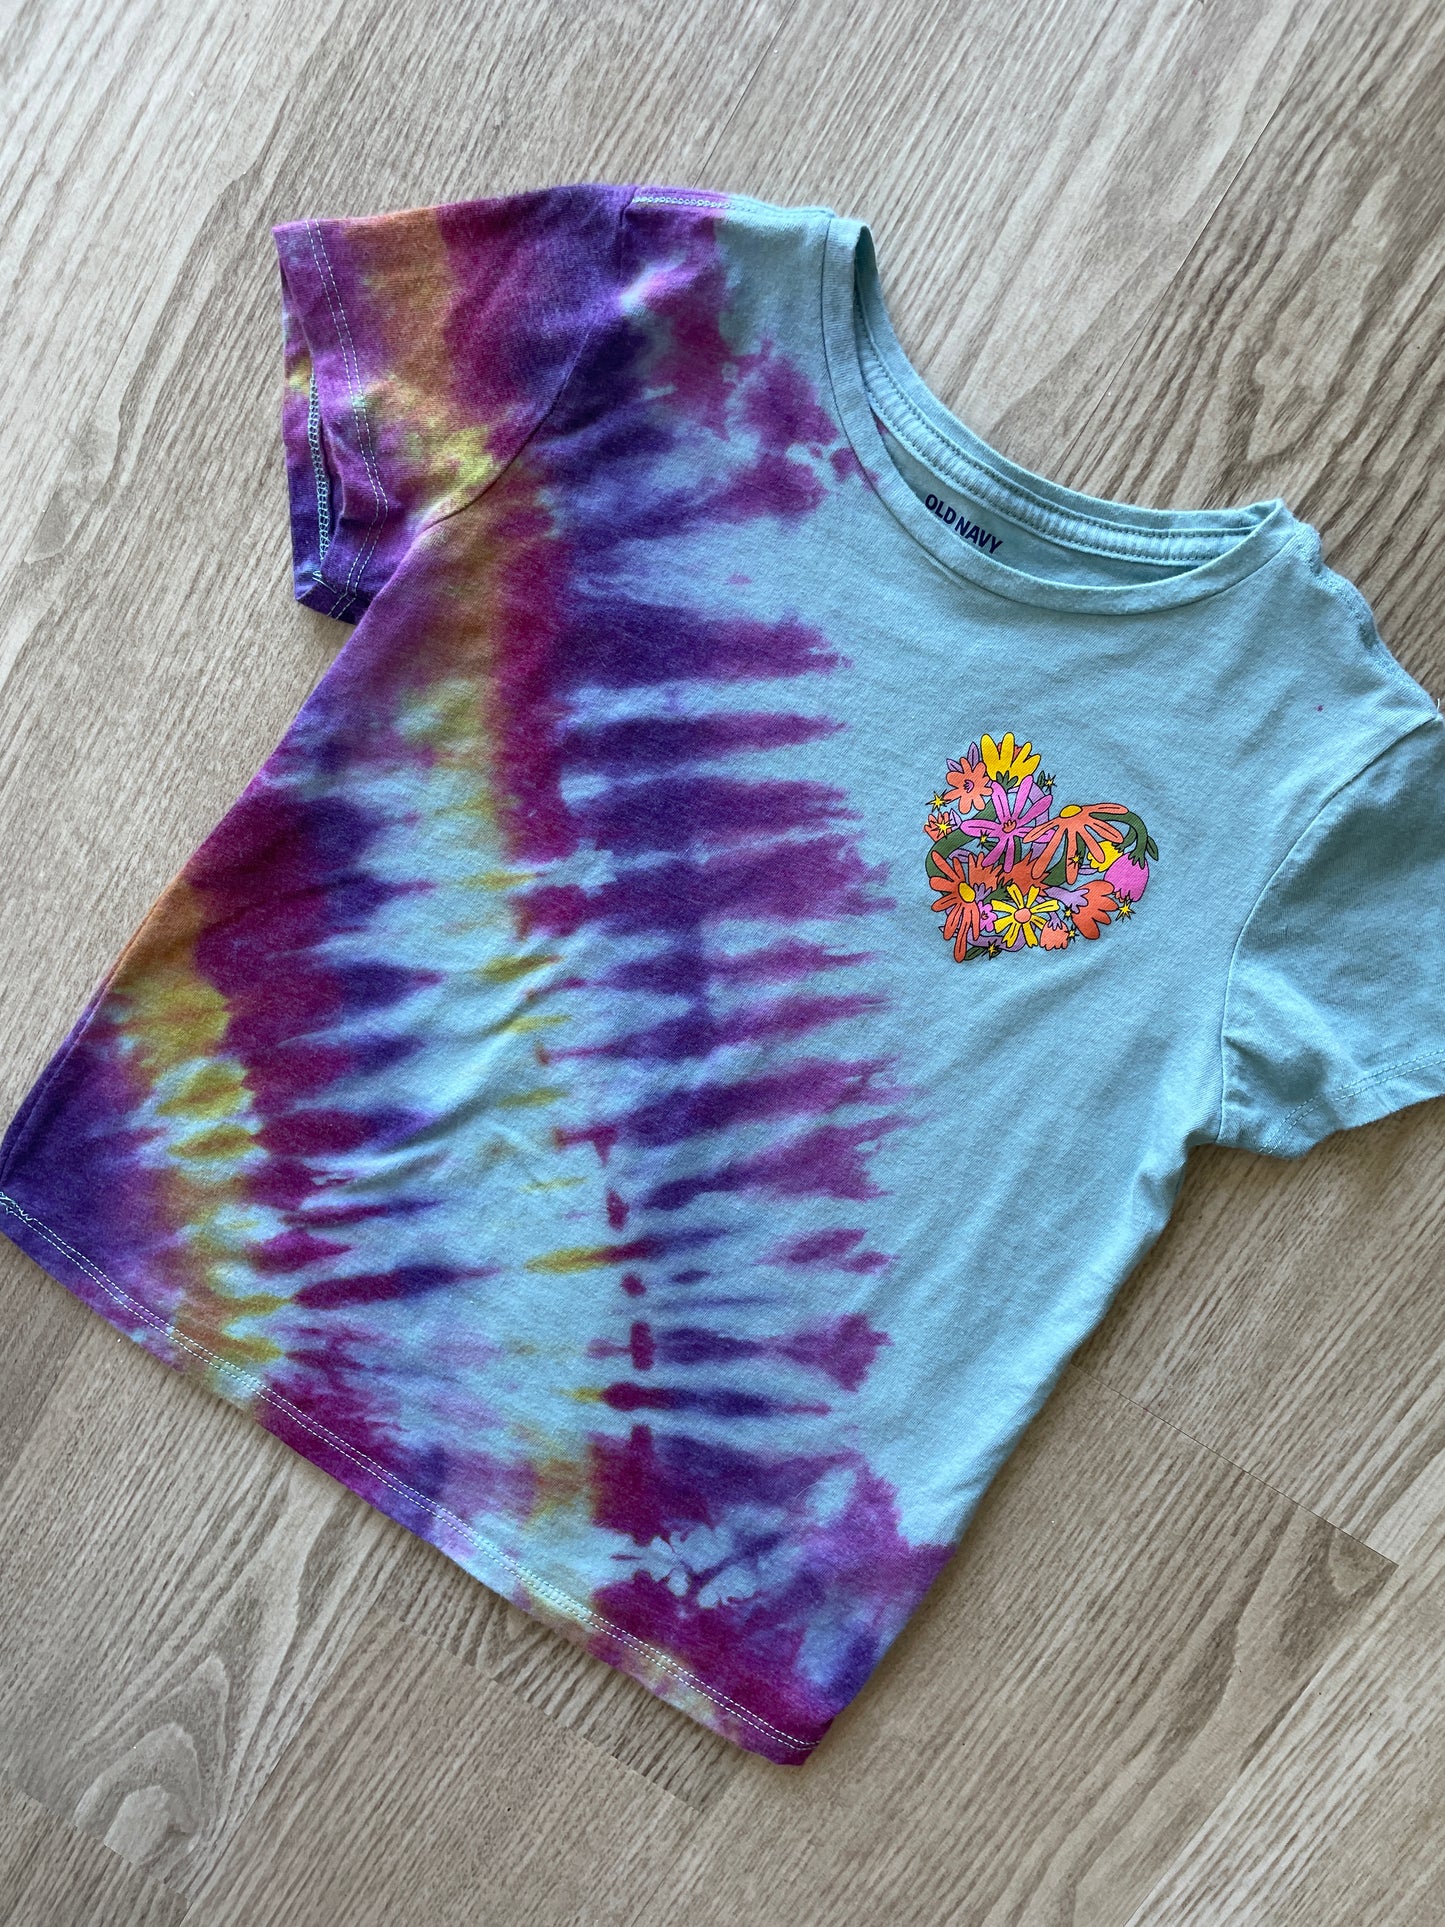 YOUTH GIRLS LARGE Floral Heart Handmade Tie Dye T-Shirt | One-Of-a-Kind Pink and Purple Short Sleeve